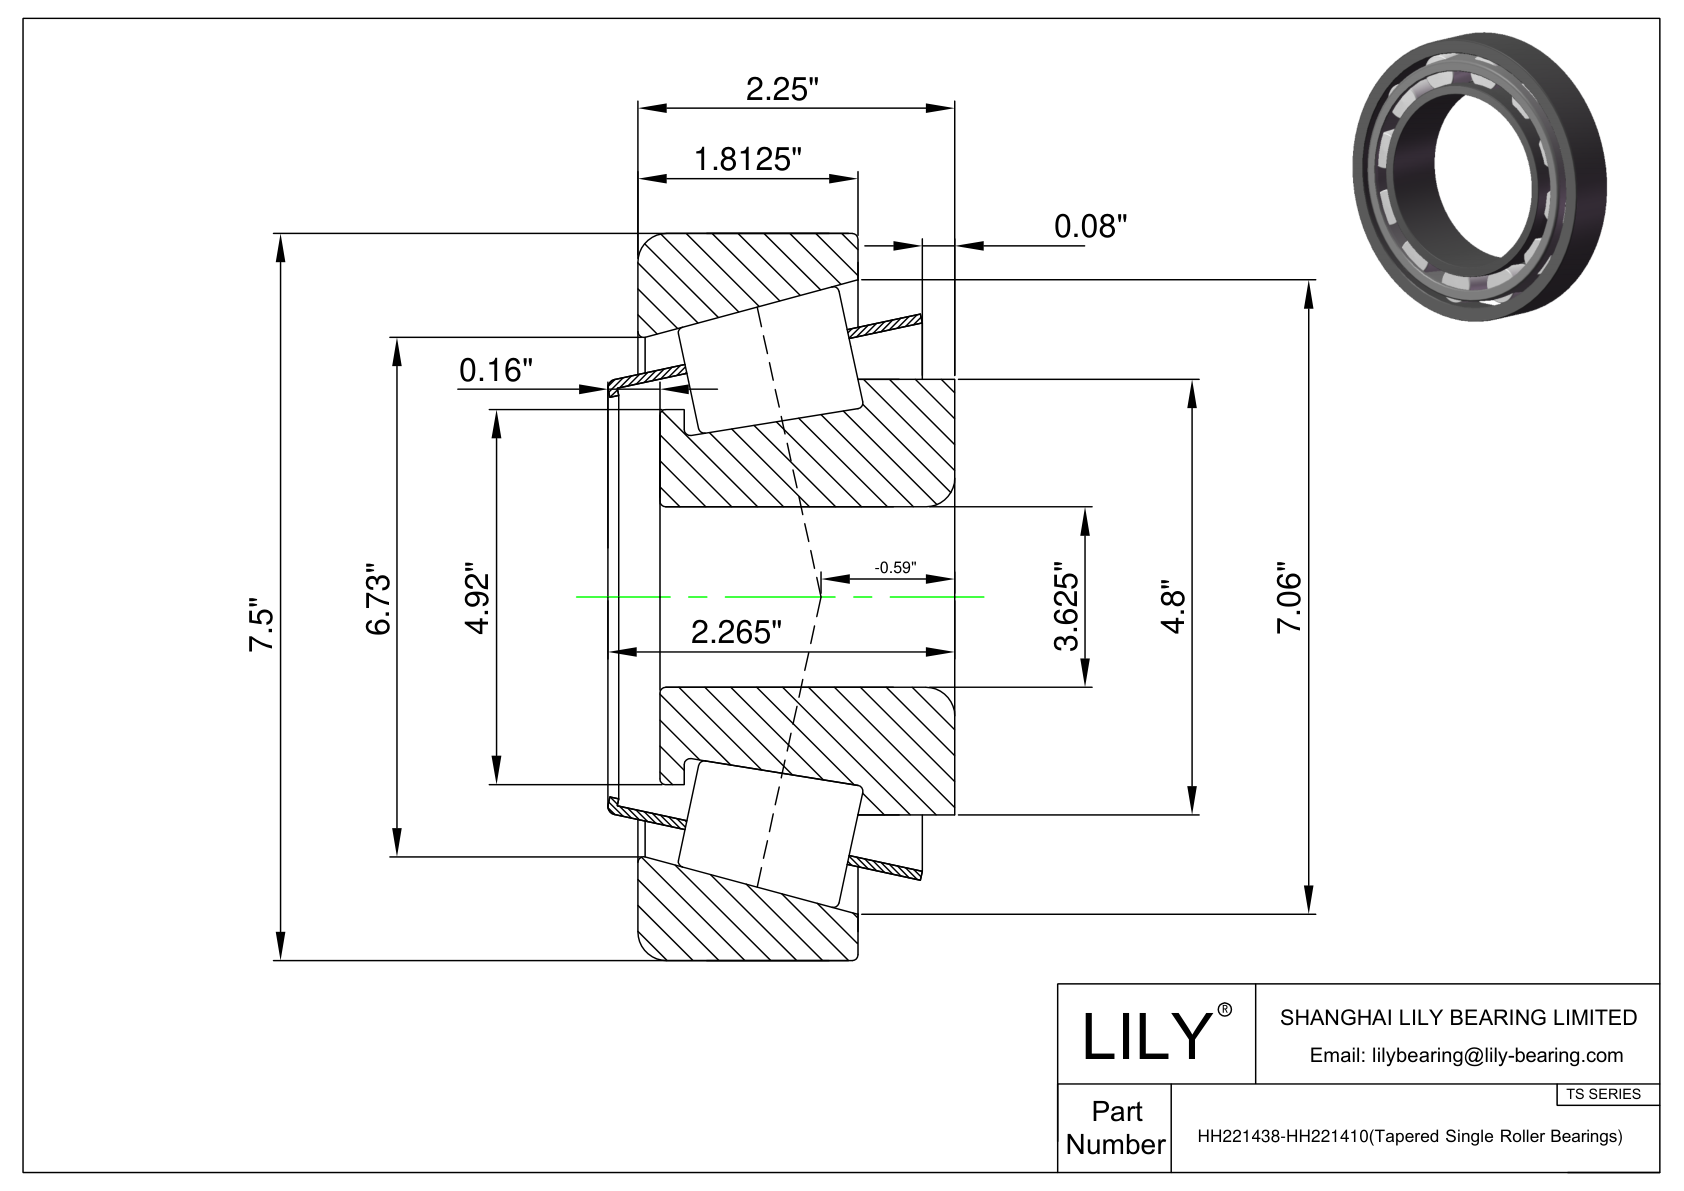 HH221438-HH221410 TS (Tapered Single Roller Bearings) (Imperial) cad drawing